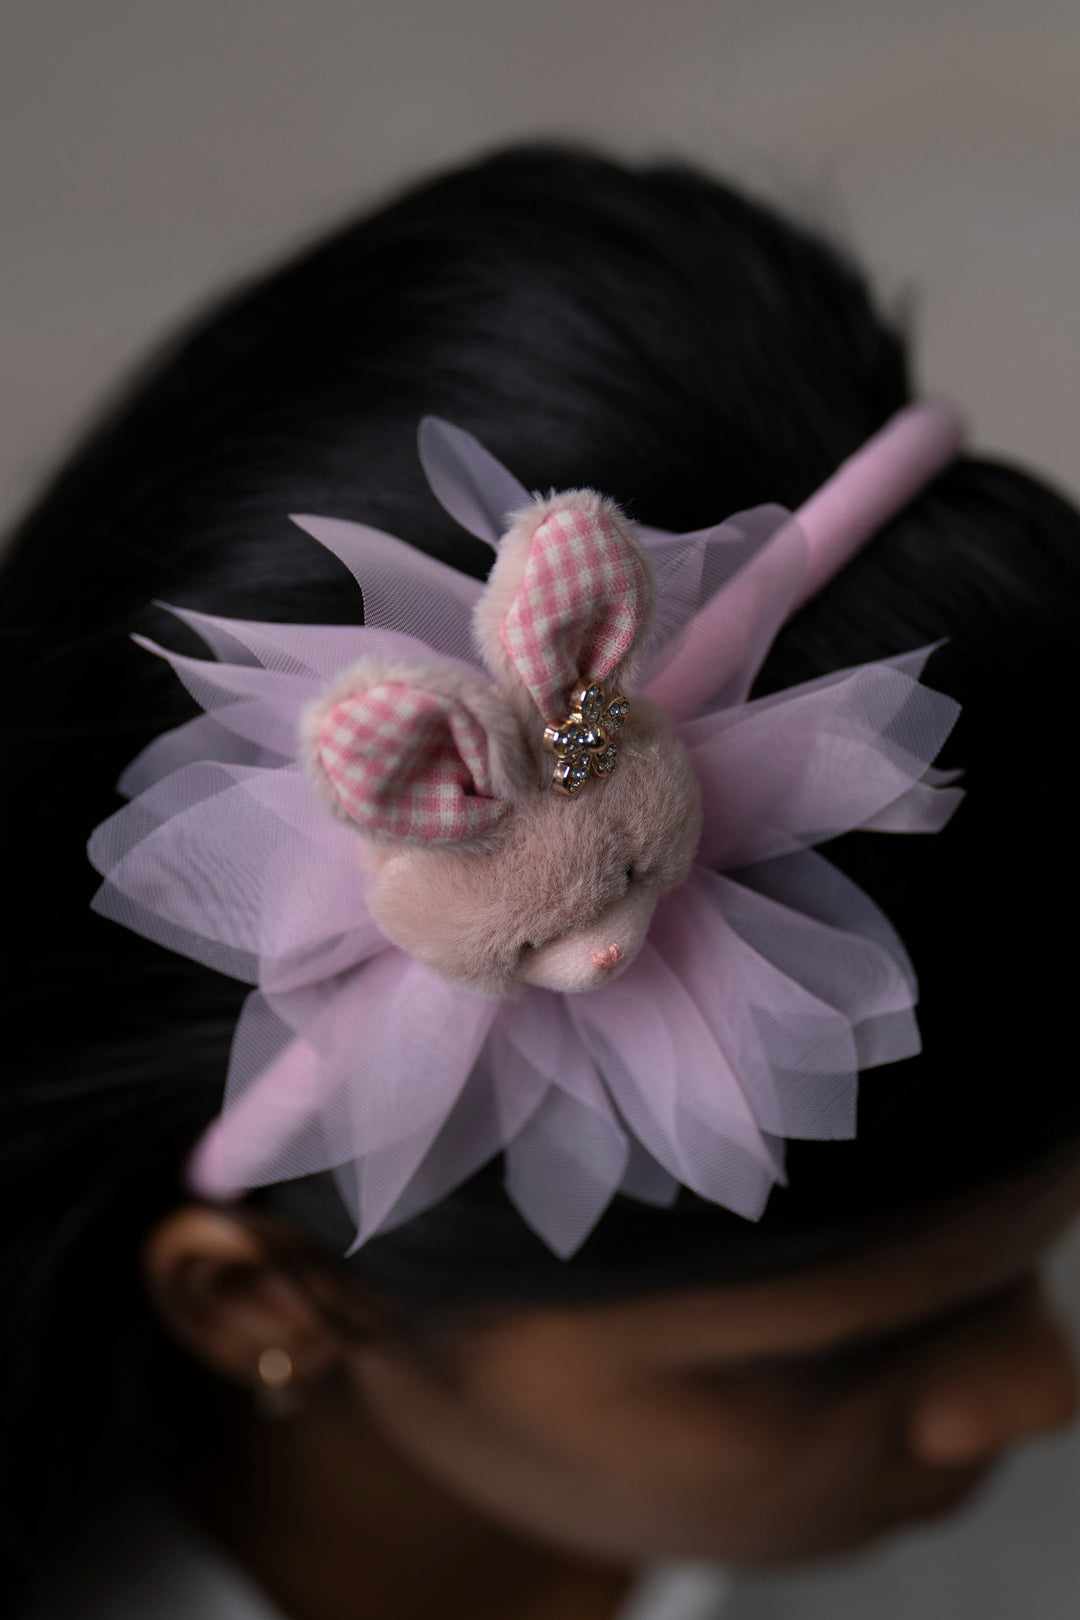 The Nesavu Hair Band Mystical Mauve Bunny Hairbow with Tulle and Shimmering Accents Nesavu Pink JHB80D Enchanting Mauve Bunny Hair Accessory | Whimsical Tulle Hairbow with Sparkle | The Nesavu